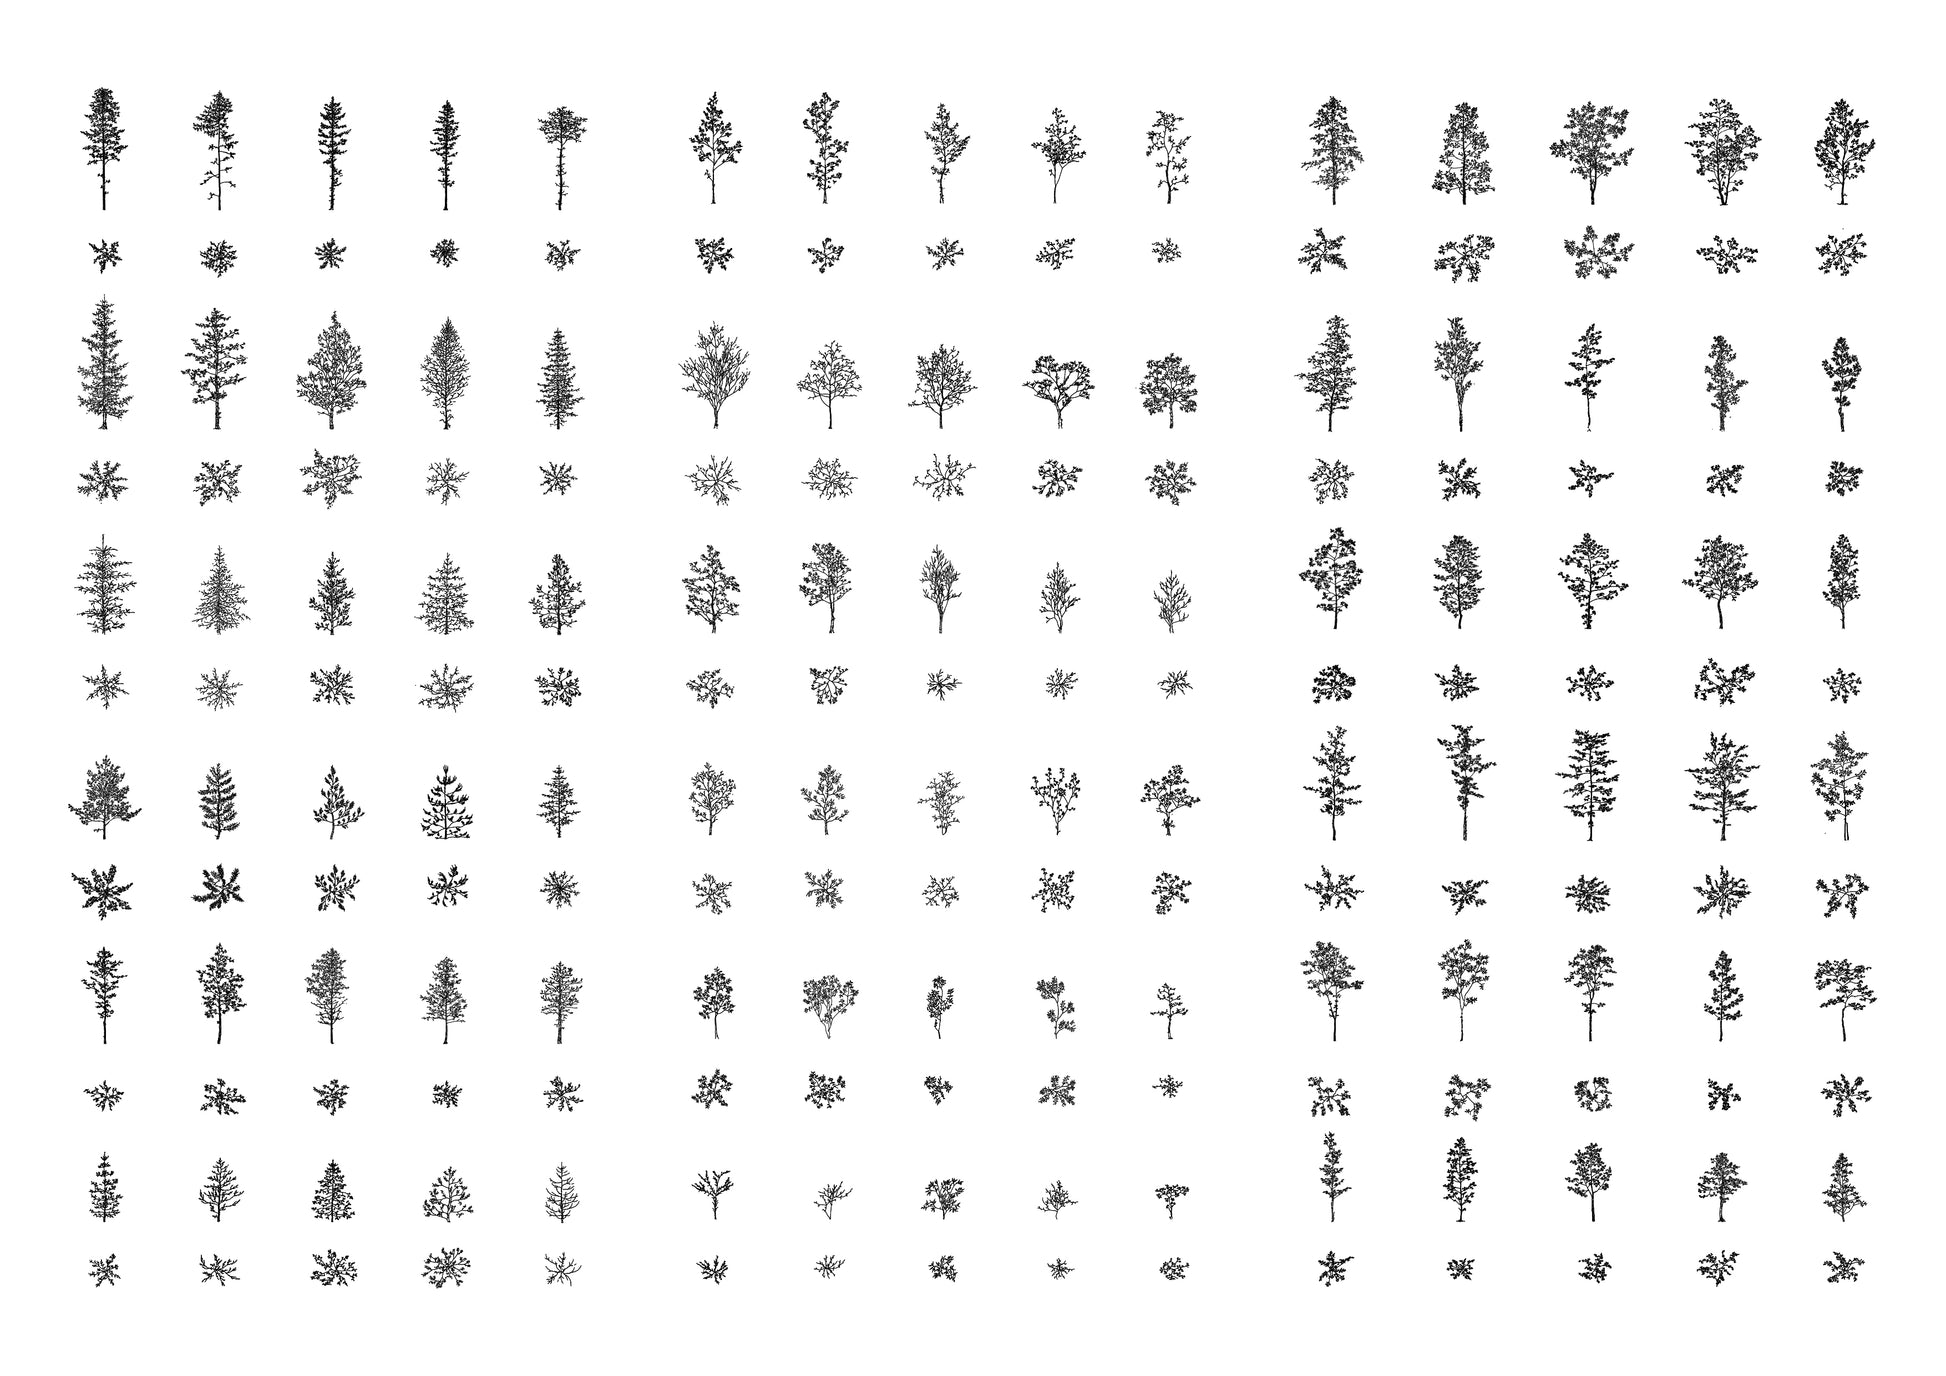 cad drawings of ninety trees in plan and elevation